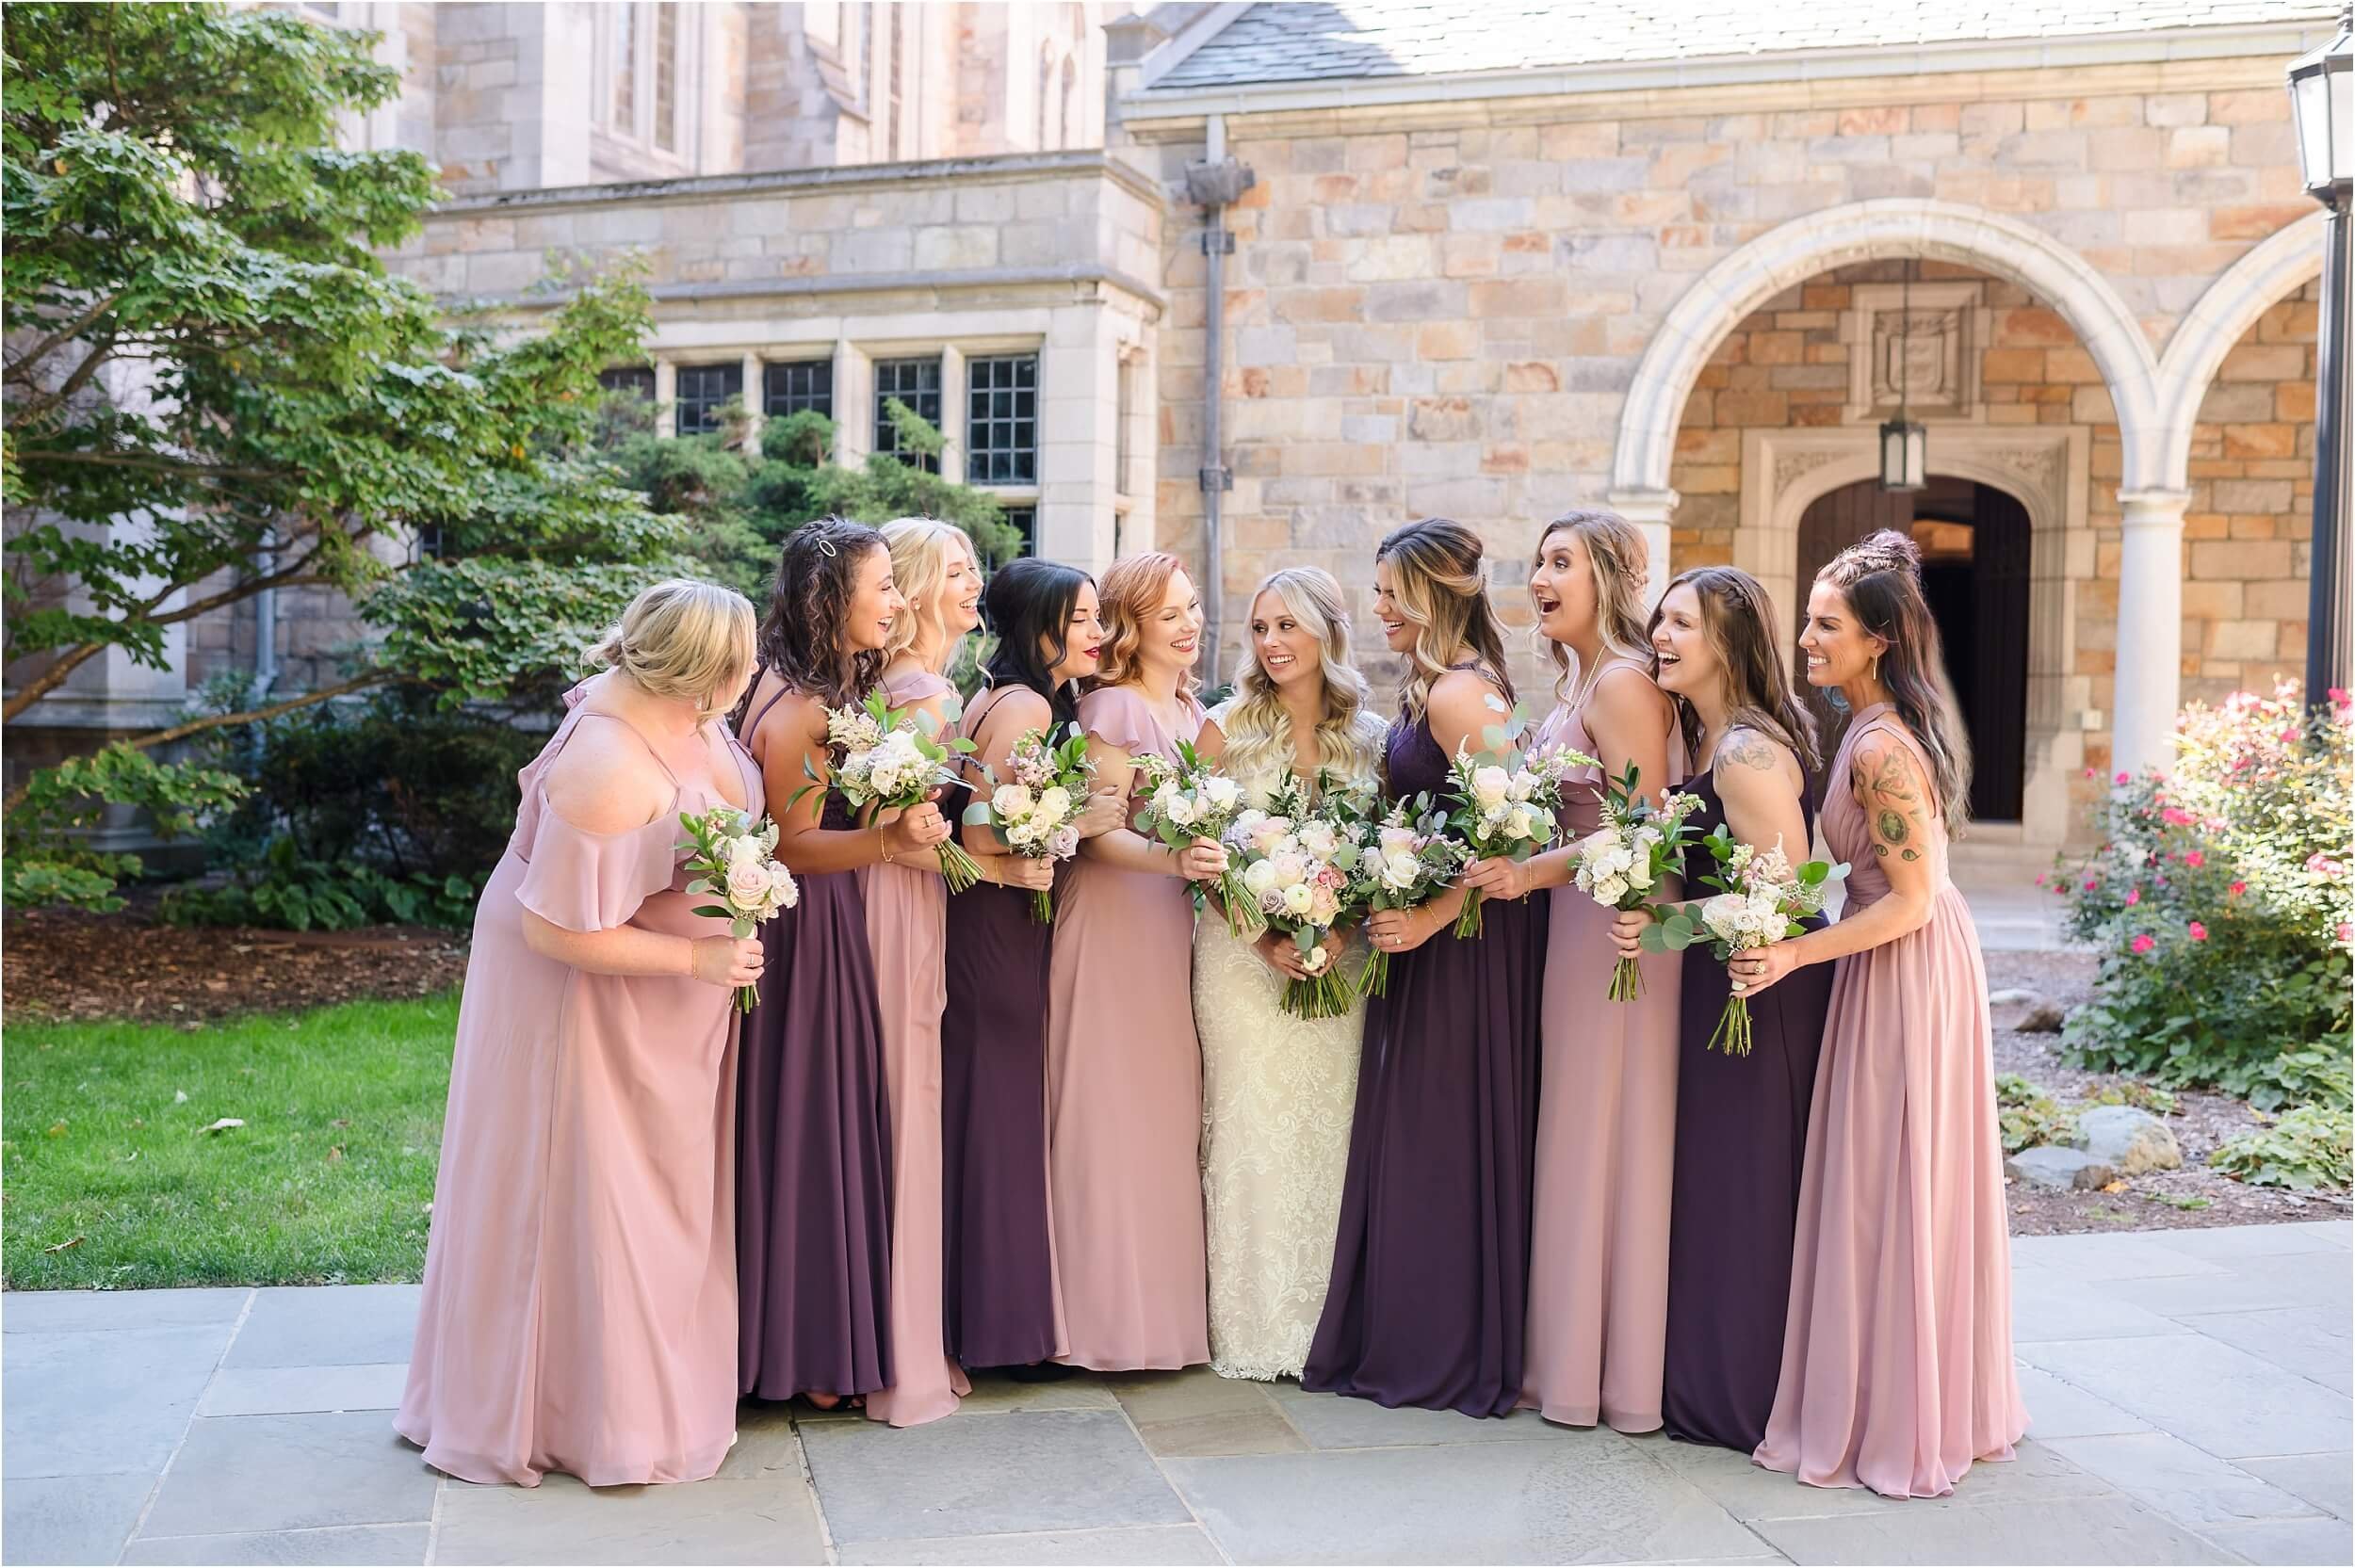  A group of bridesmaids talking in the University of Michigan law quad during their friends wedding.  